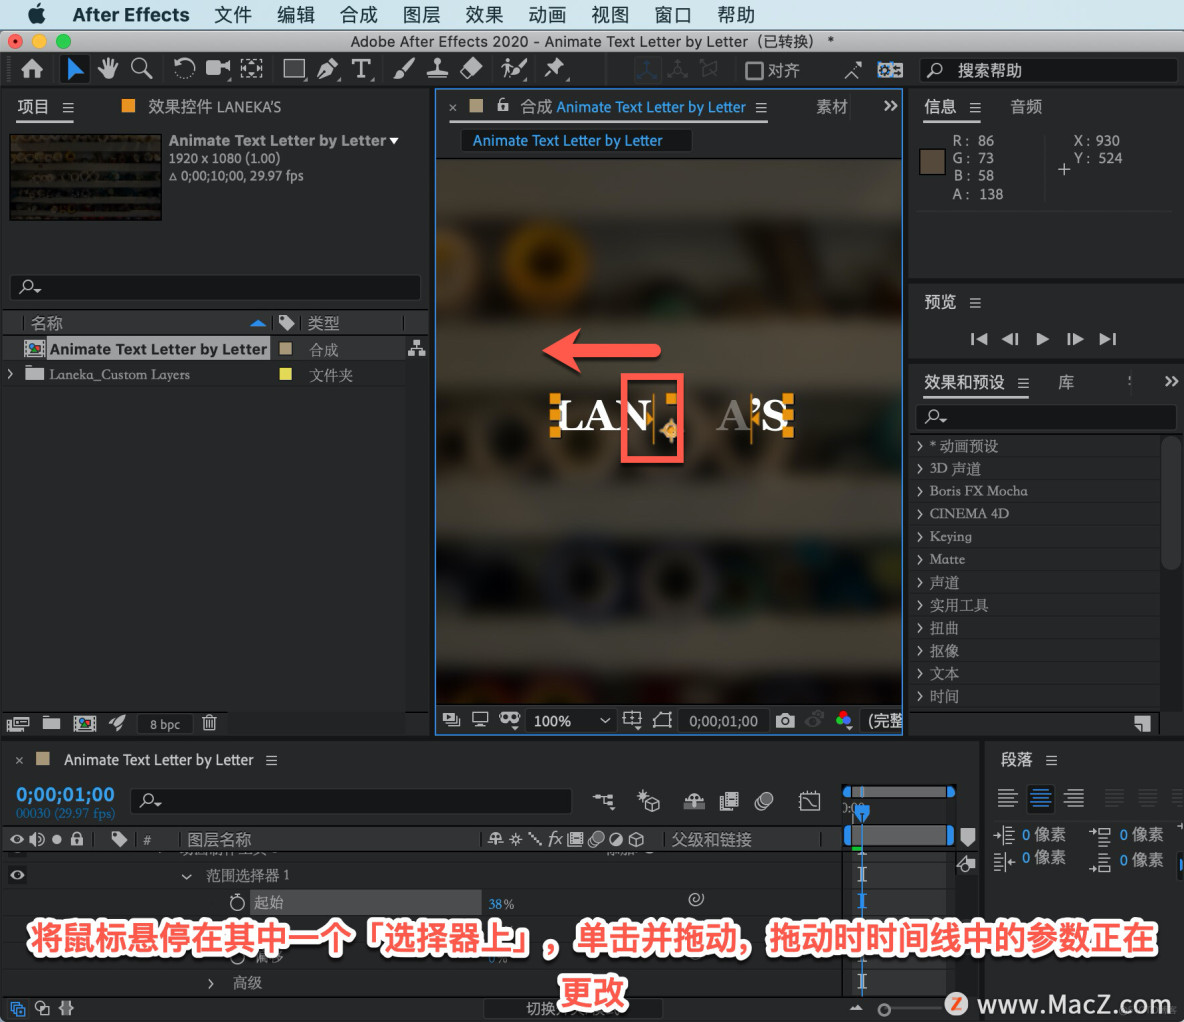 After Effects 教程，如何在 After Effects 中创建每个角色的动画？_After Effects_09